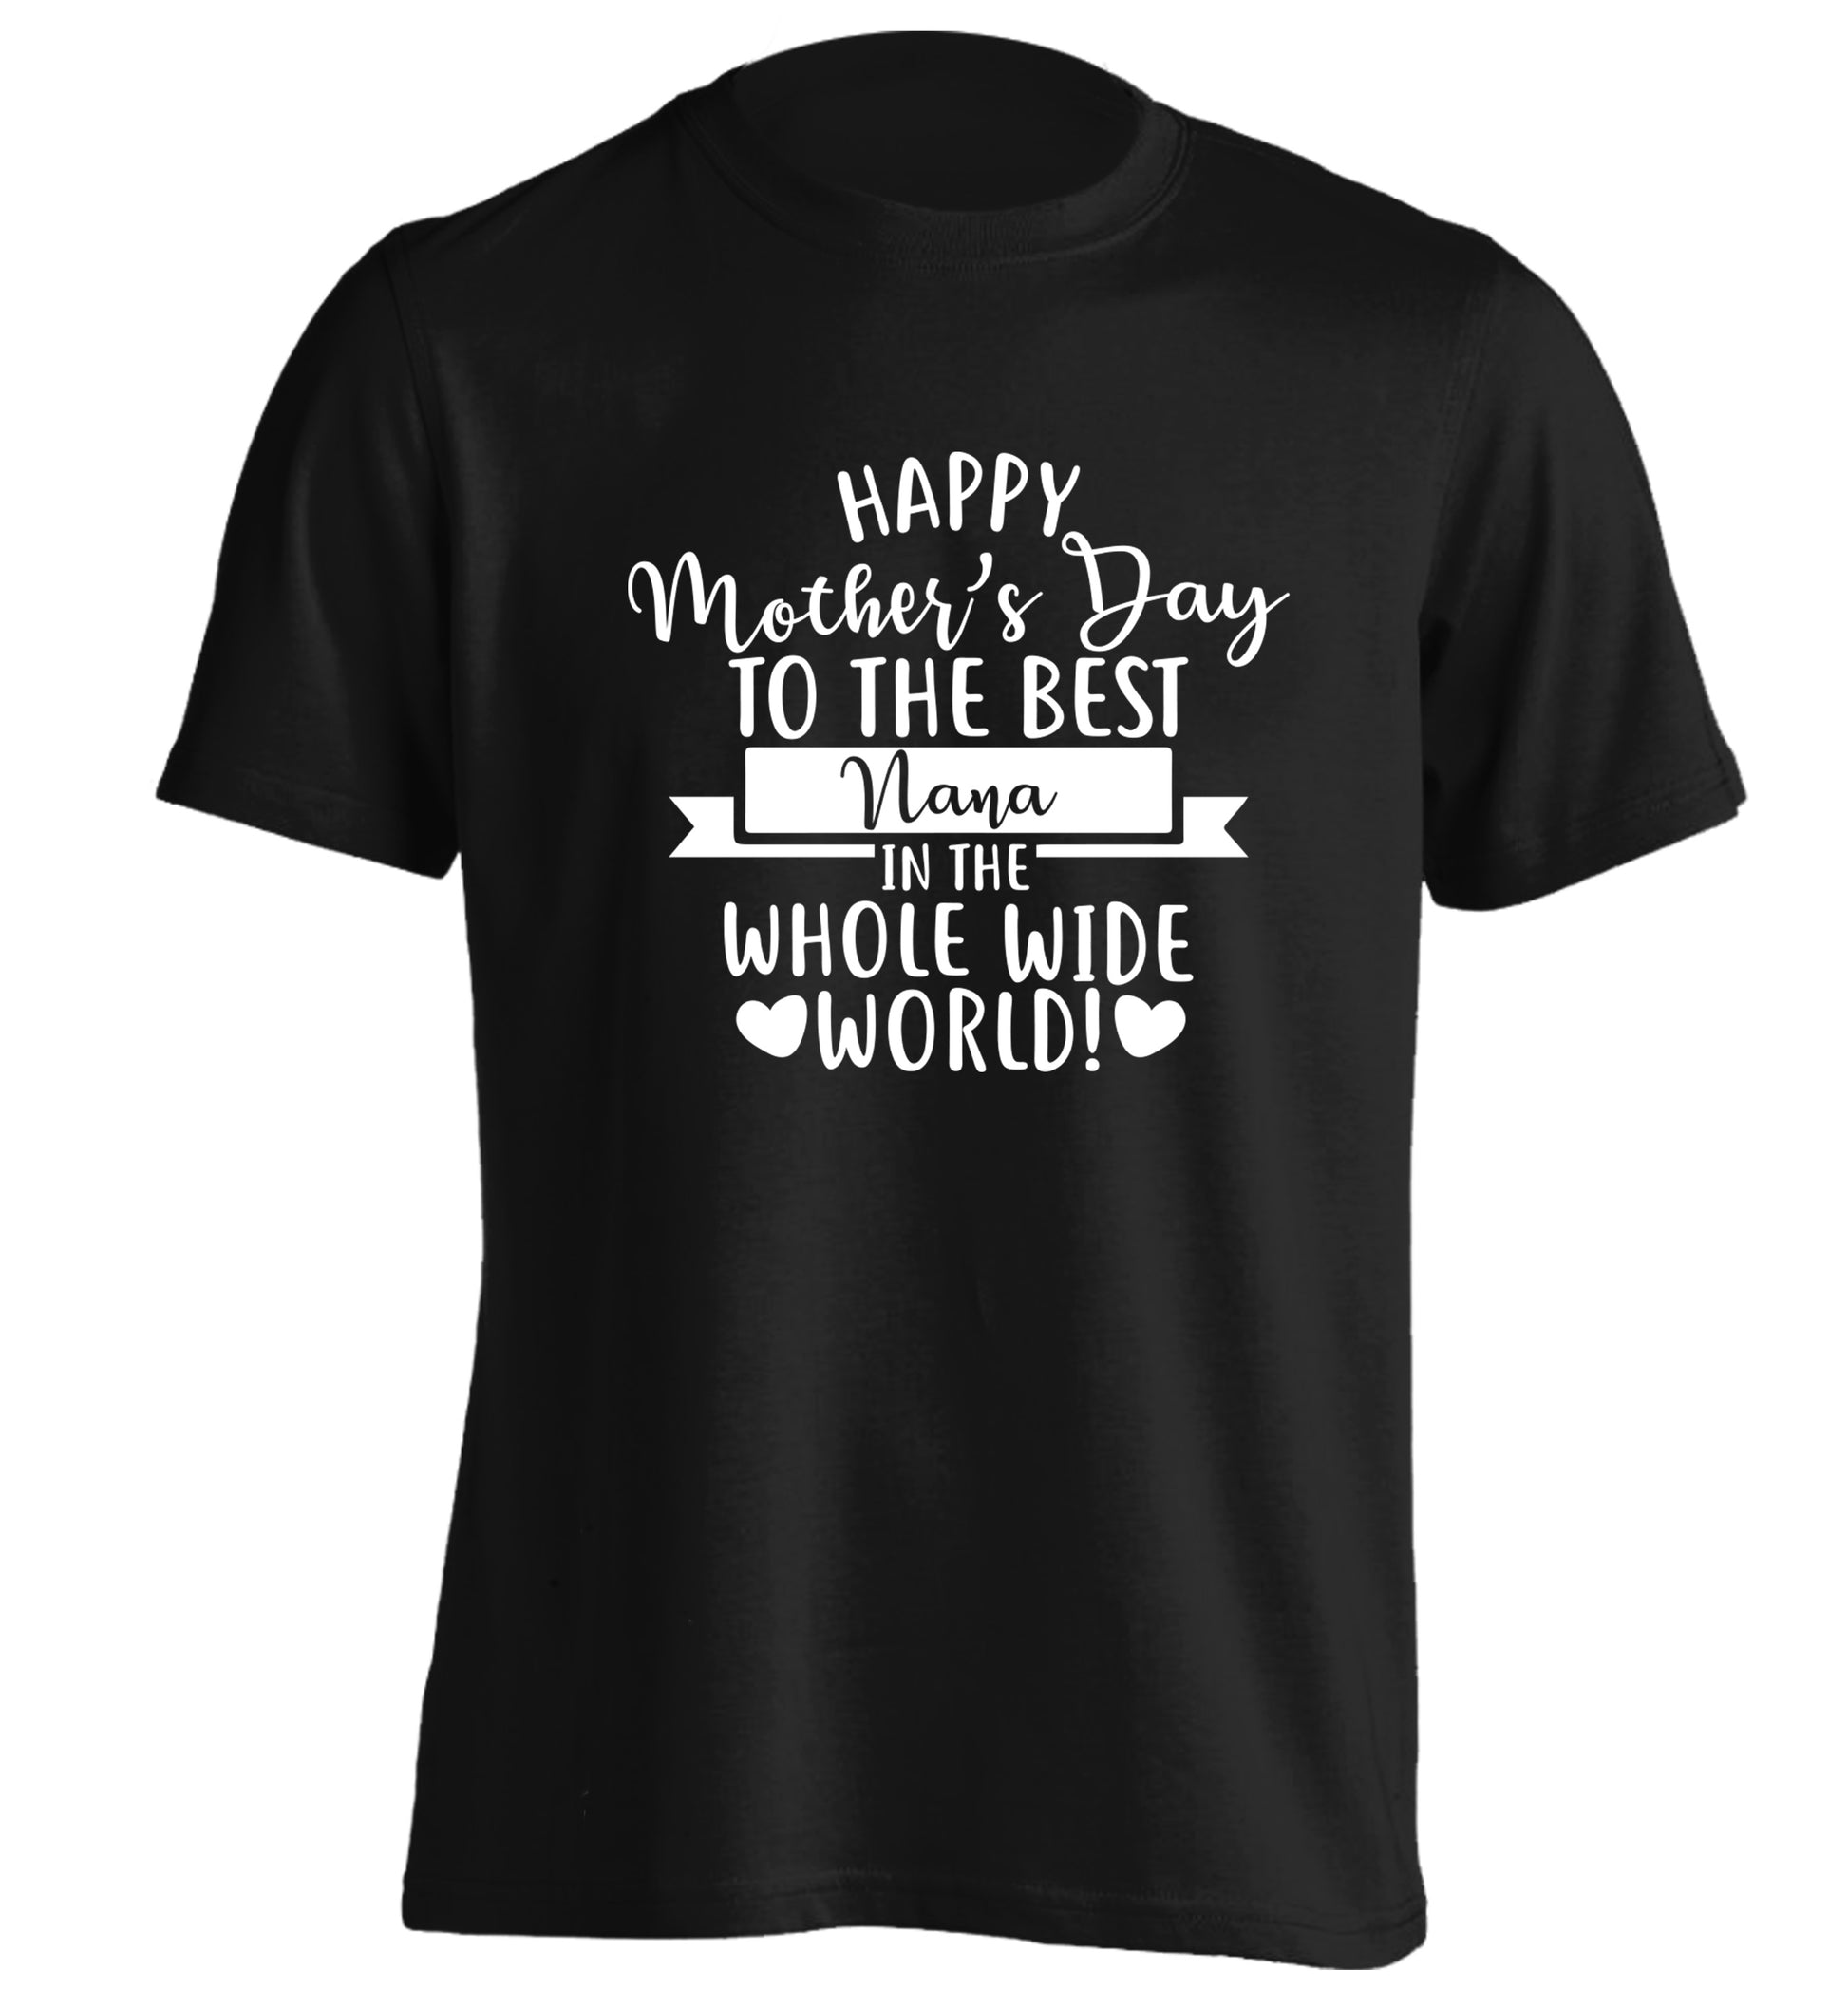 Happy mother's day to the best Nana in the world adults unisex black Tshirt 2XL